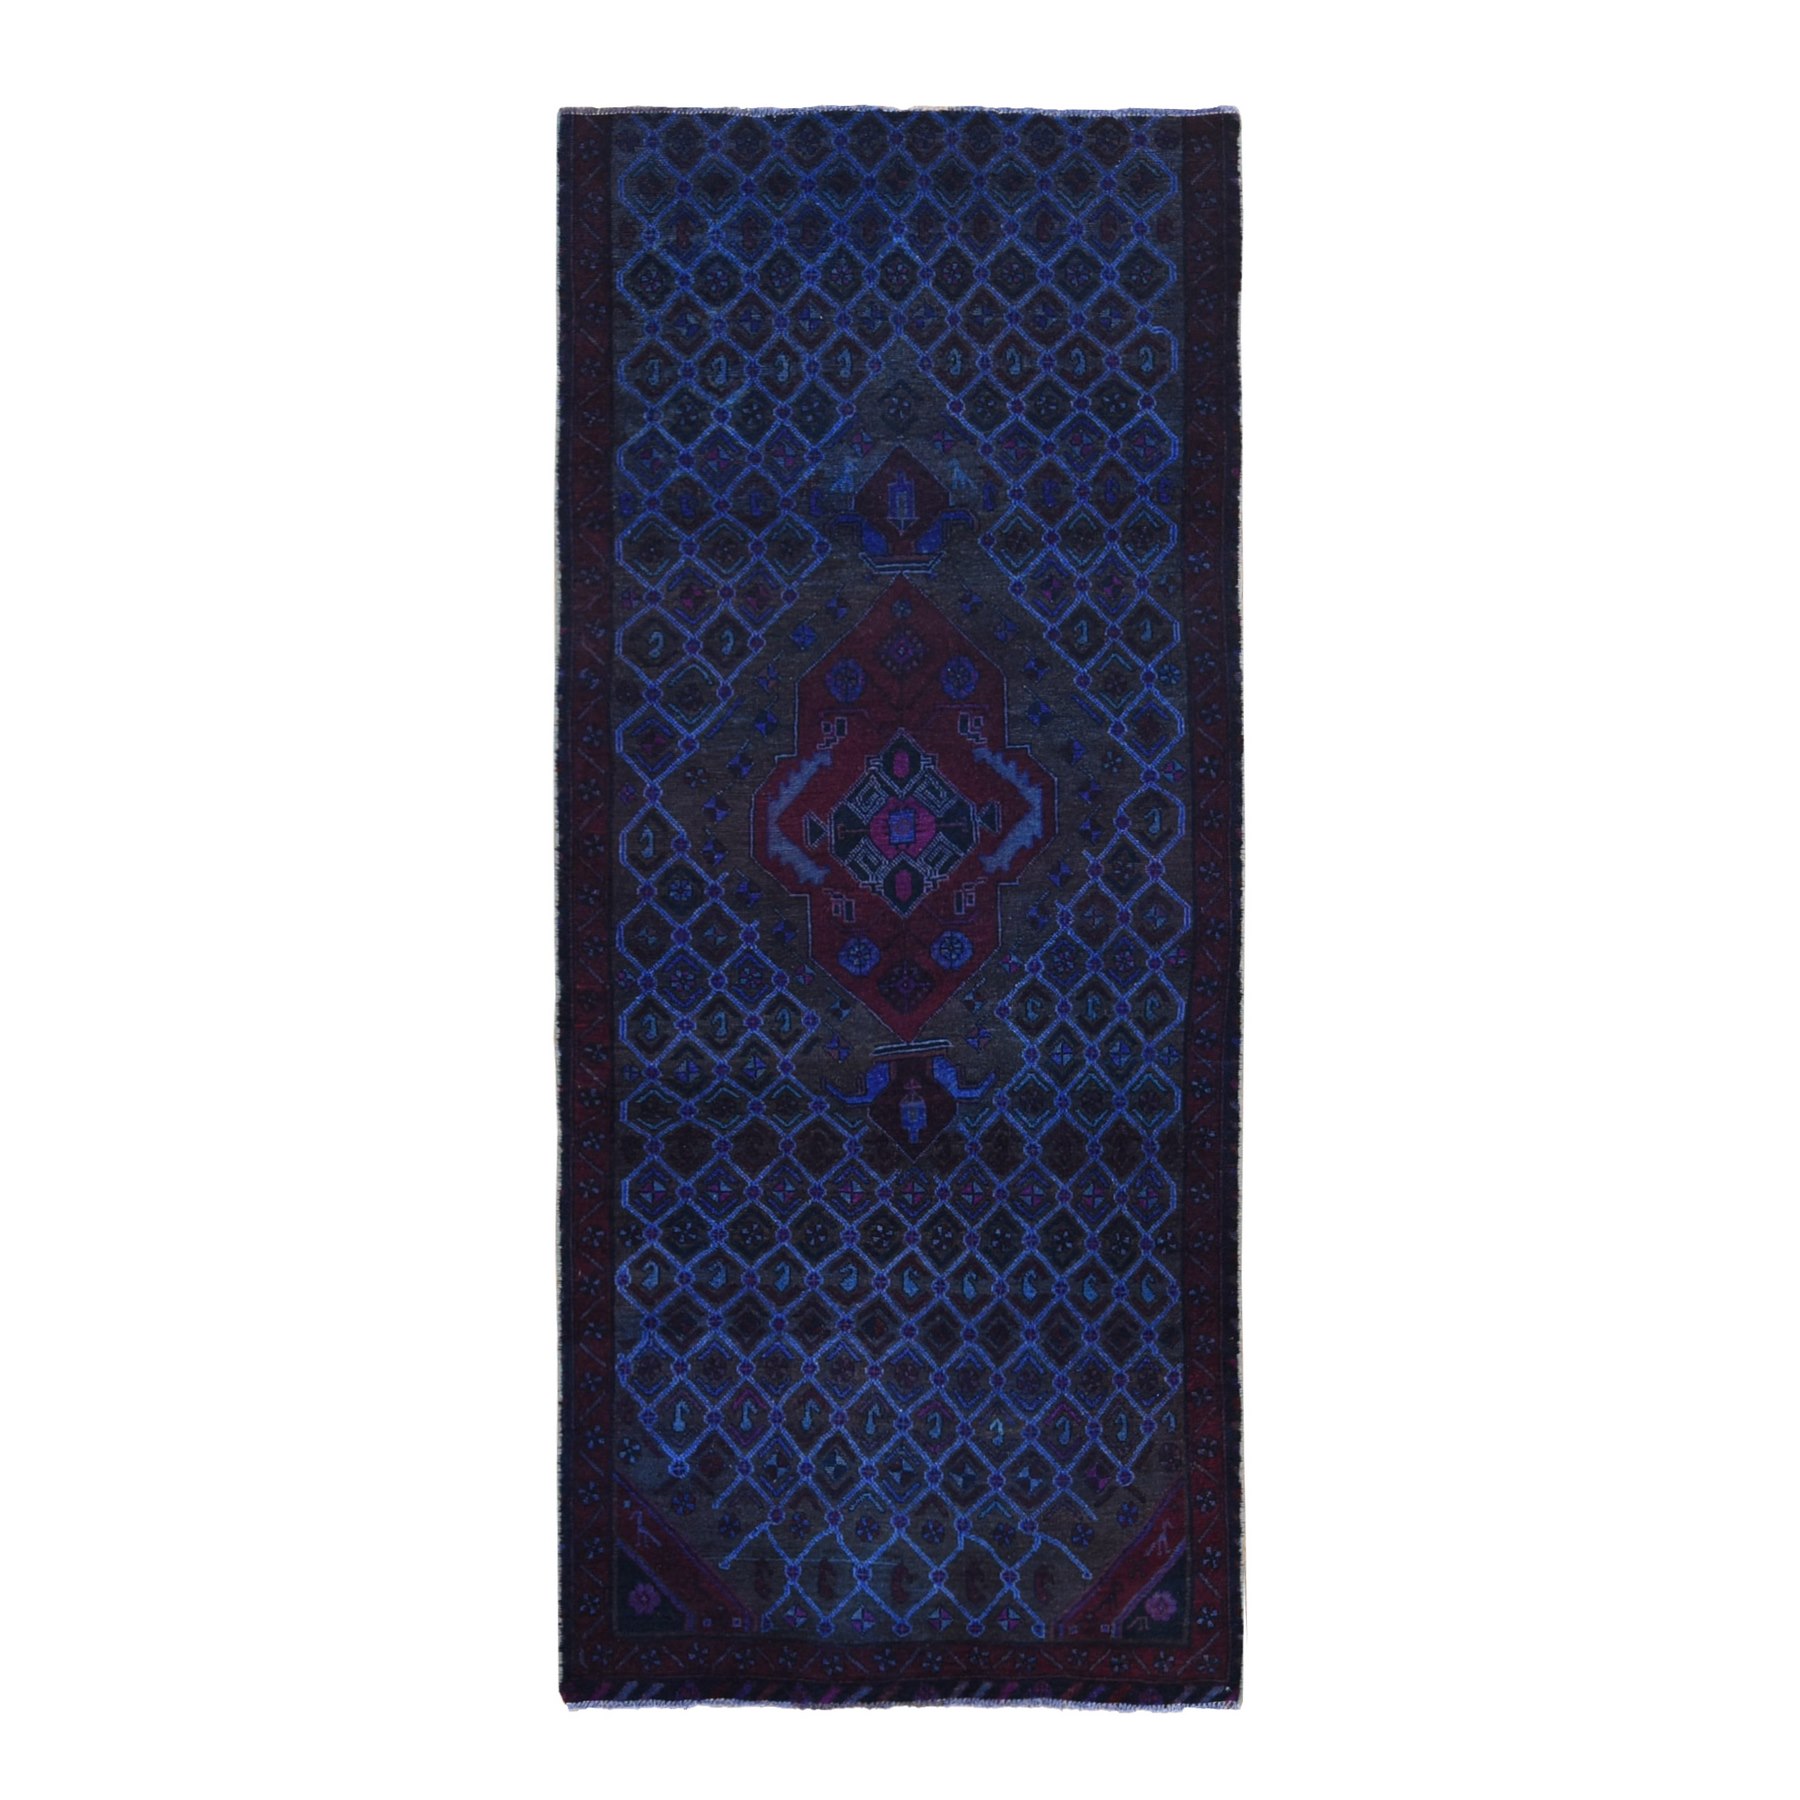 Overdyed-Vintage-Hand-Knotted-Rug-403350